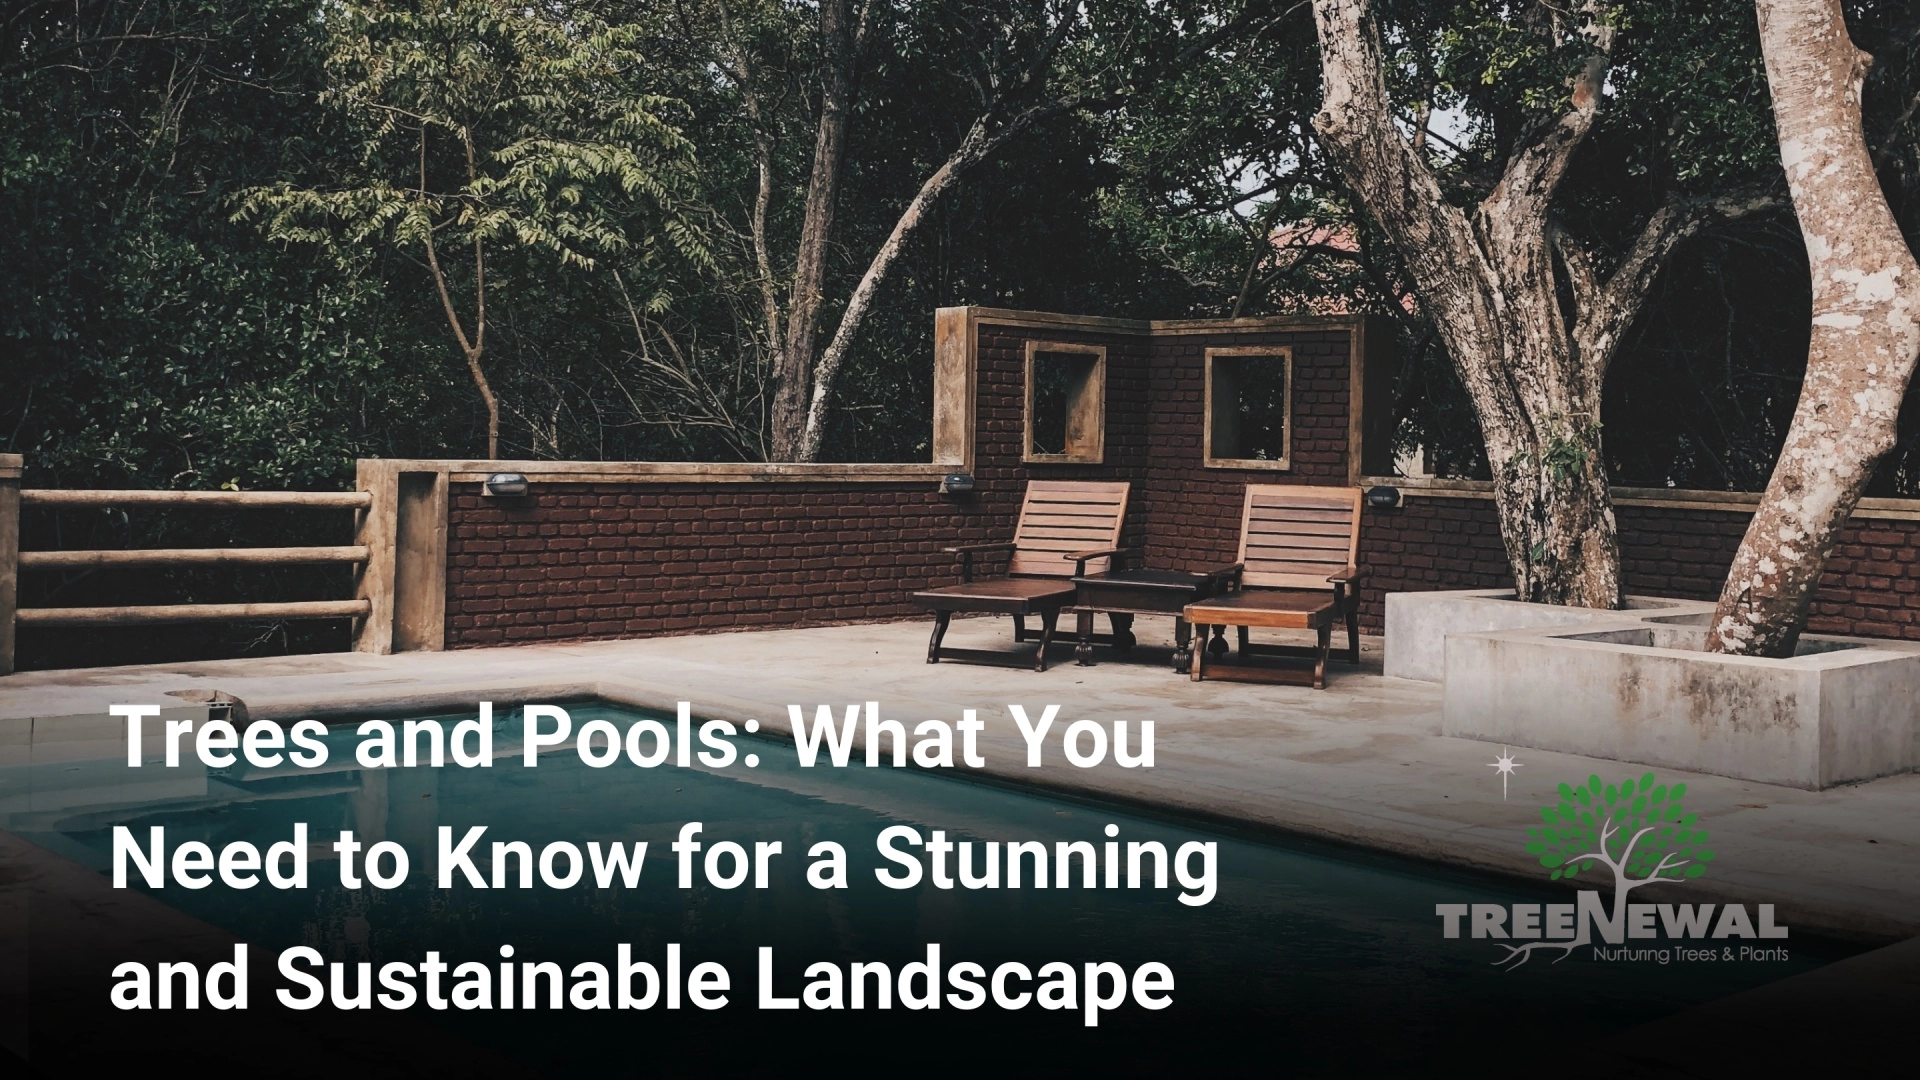 Trees and Pools: What You Need to Know for a Stunning and Sustainable Landscape